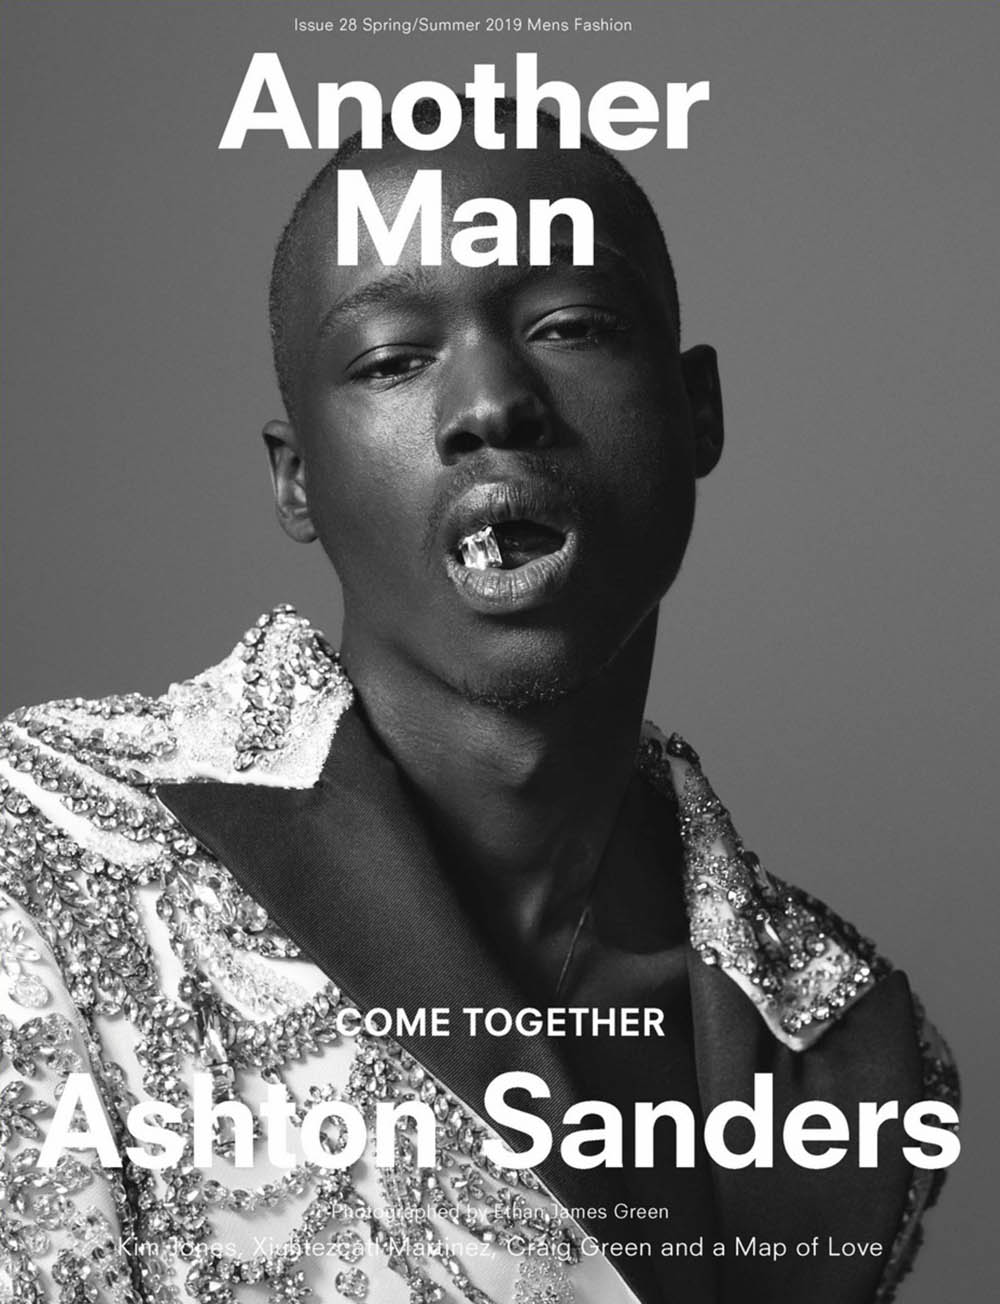 Ashton Sanders covers AnOther Man Spring Summer 2019 by Ethan James Green